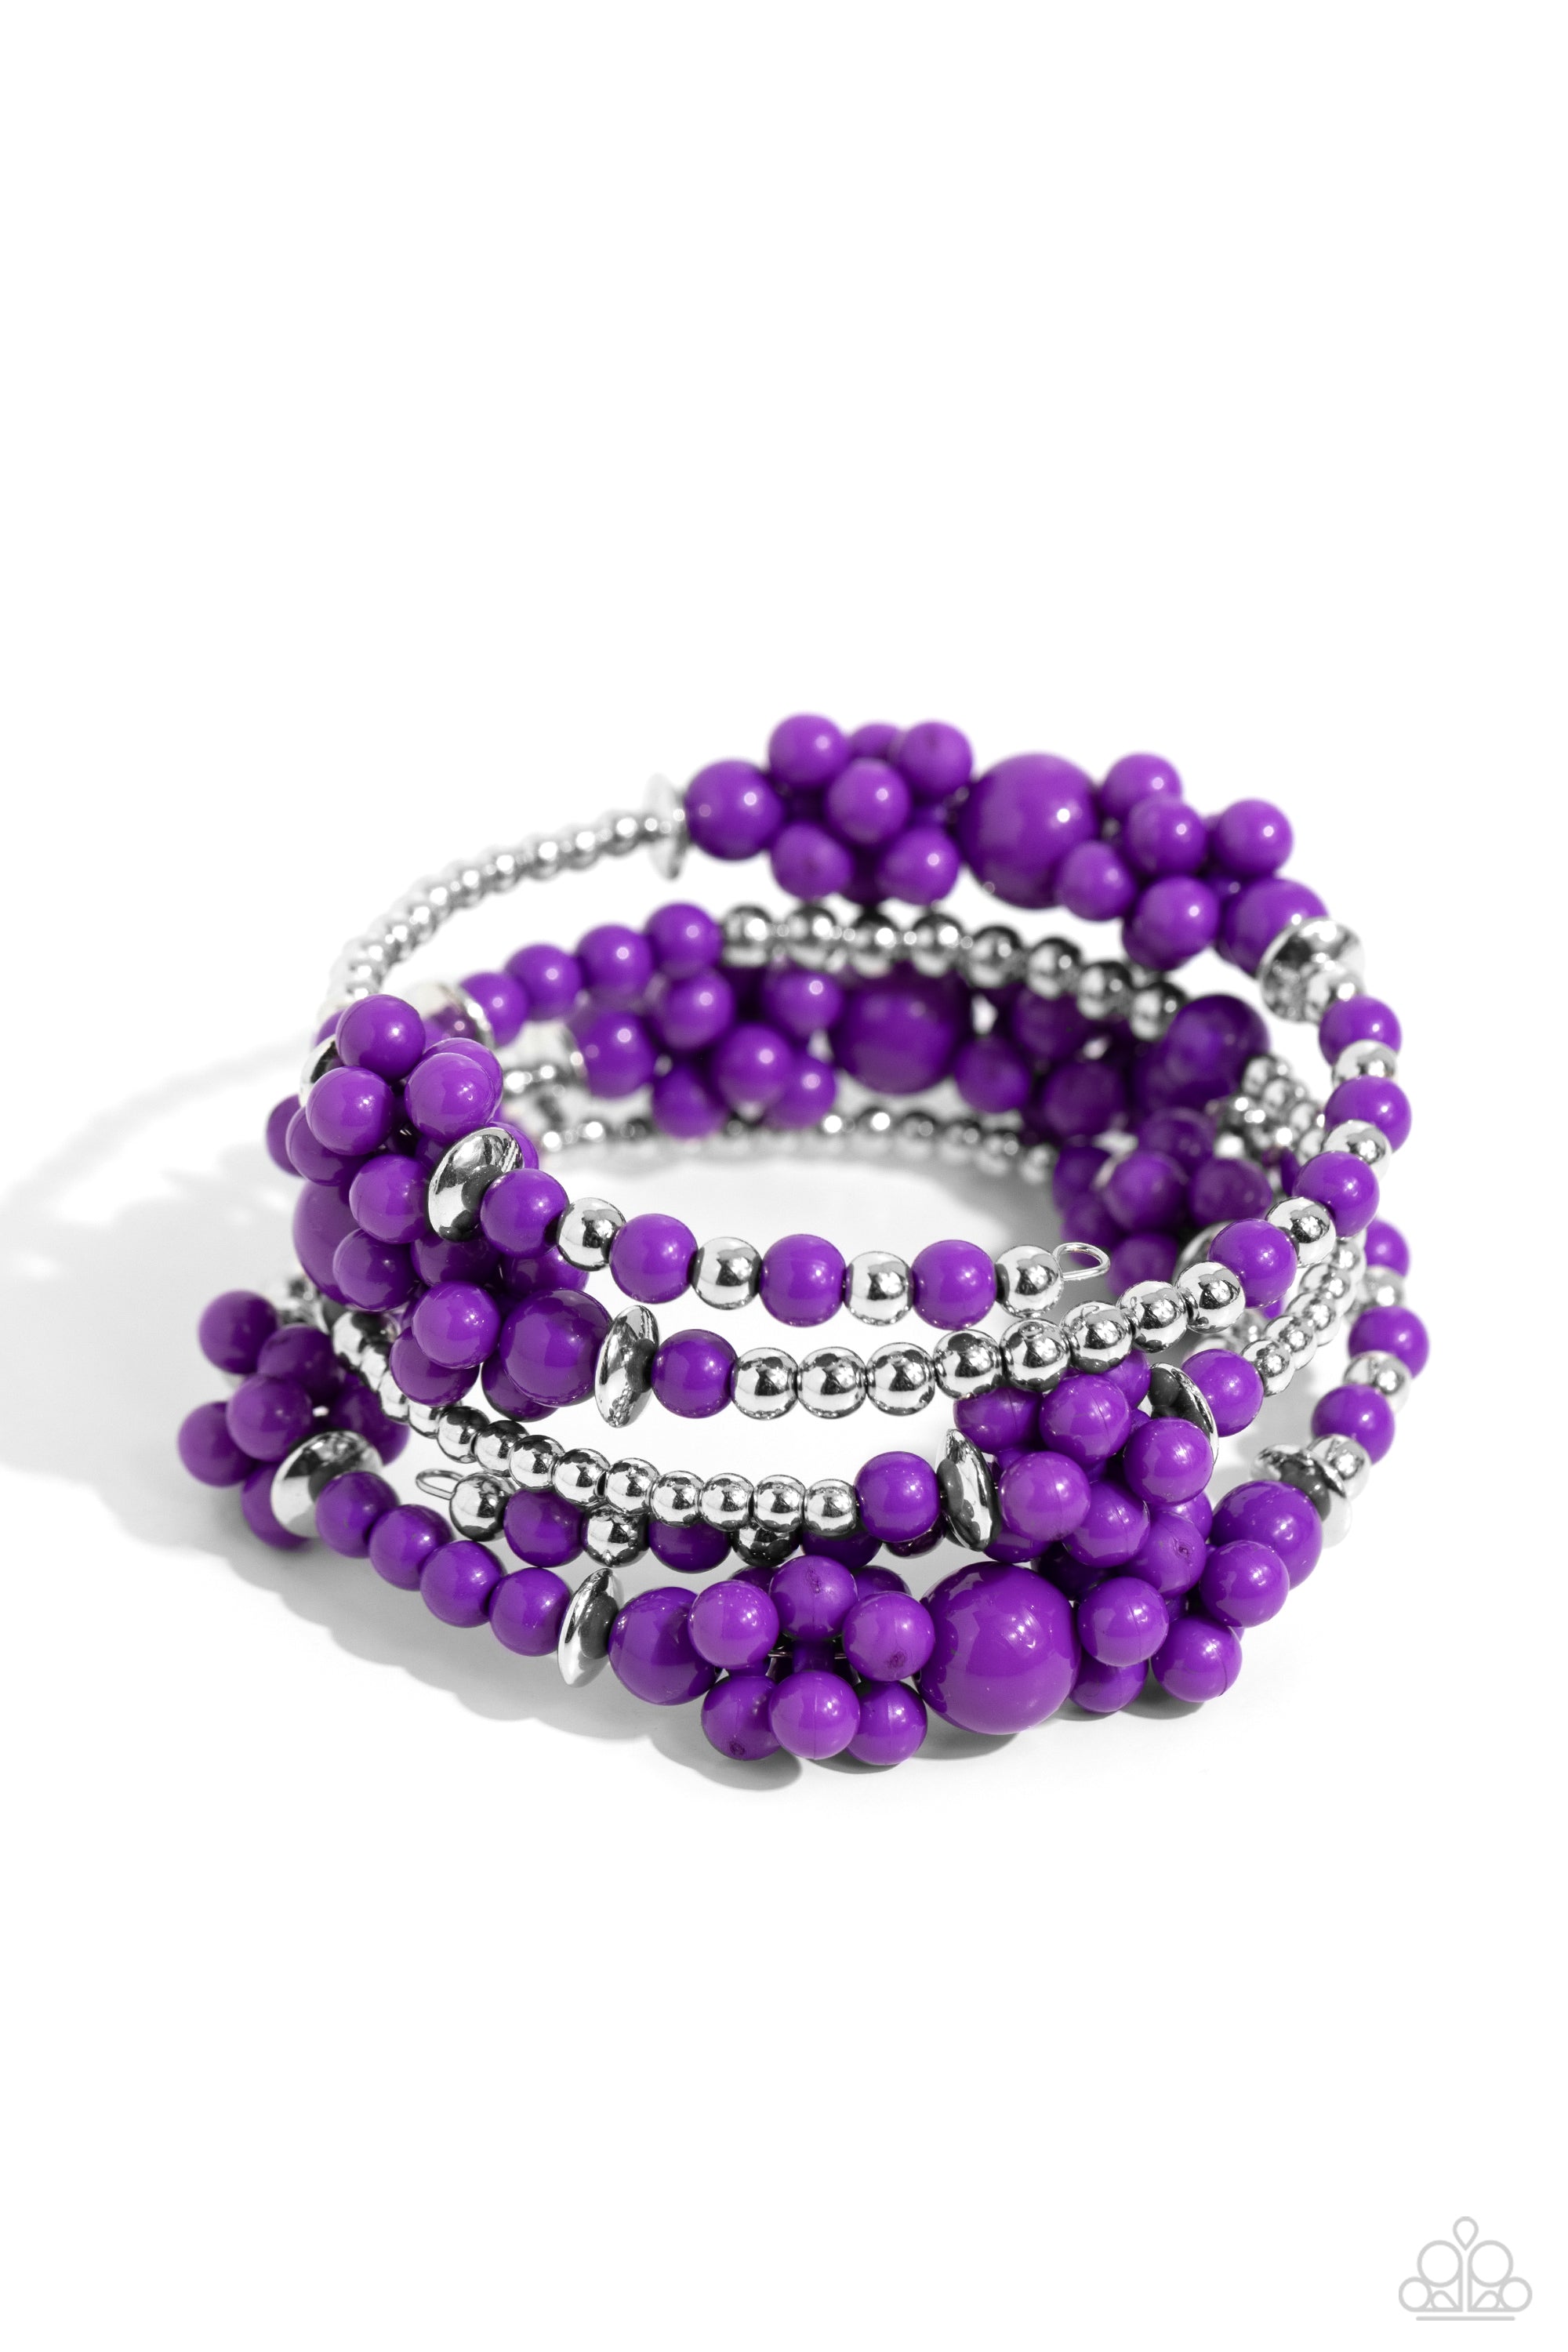 Compelling Clouds Purple Infinity Wrap Bracelet - Paparazzi Accessories- lightbox - CarasShop.com - $5 Jewelry by Cara Jewels